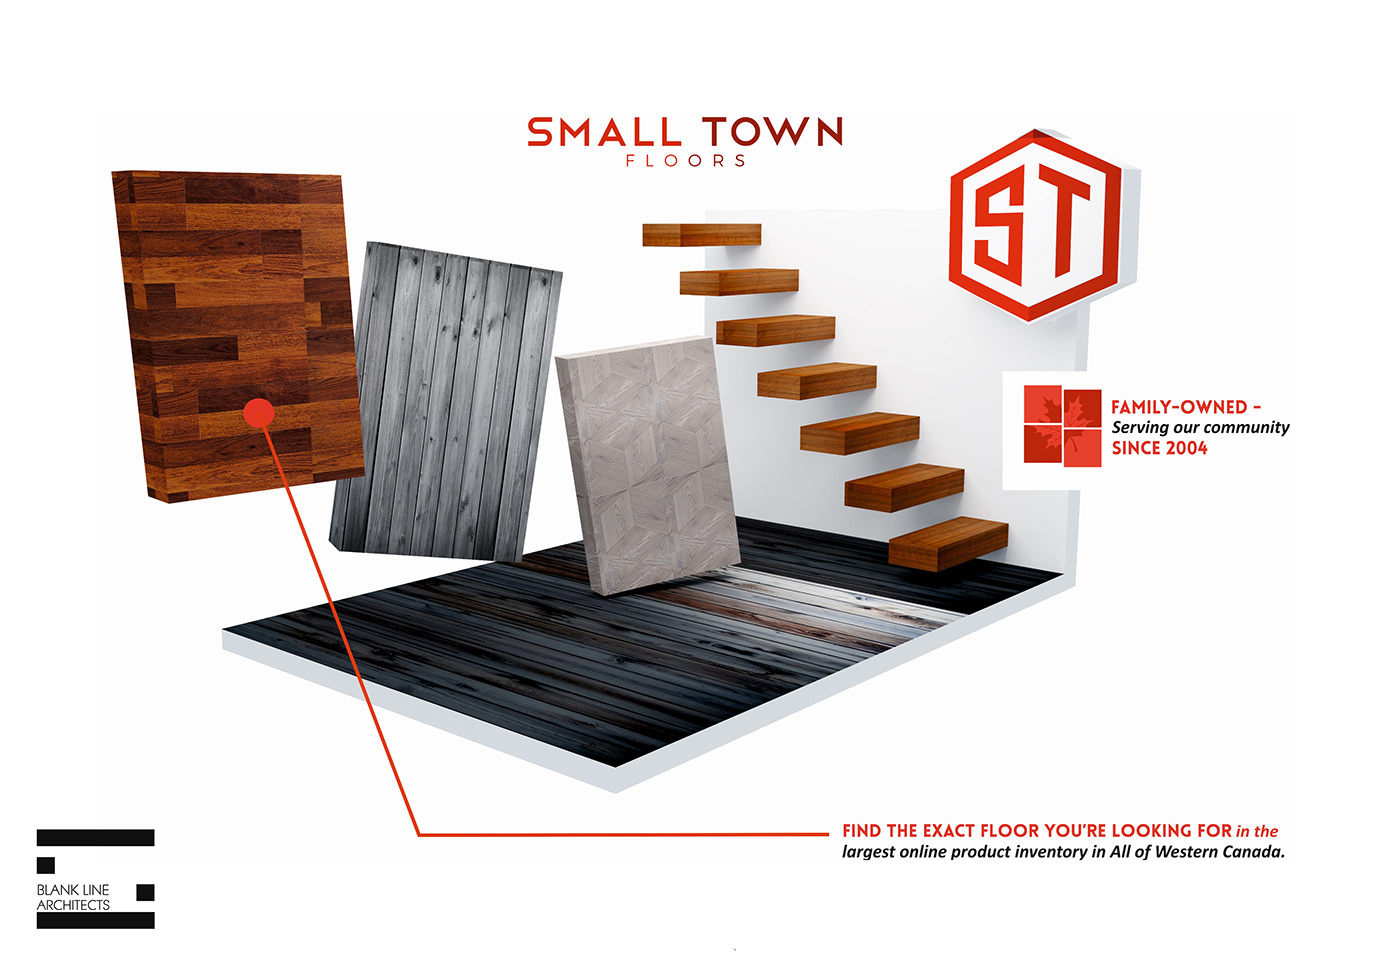 Small Town Floors Floor Textures architecture Canada Blank Line Architects western canada flooring floors